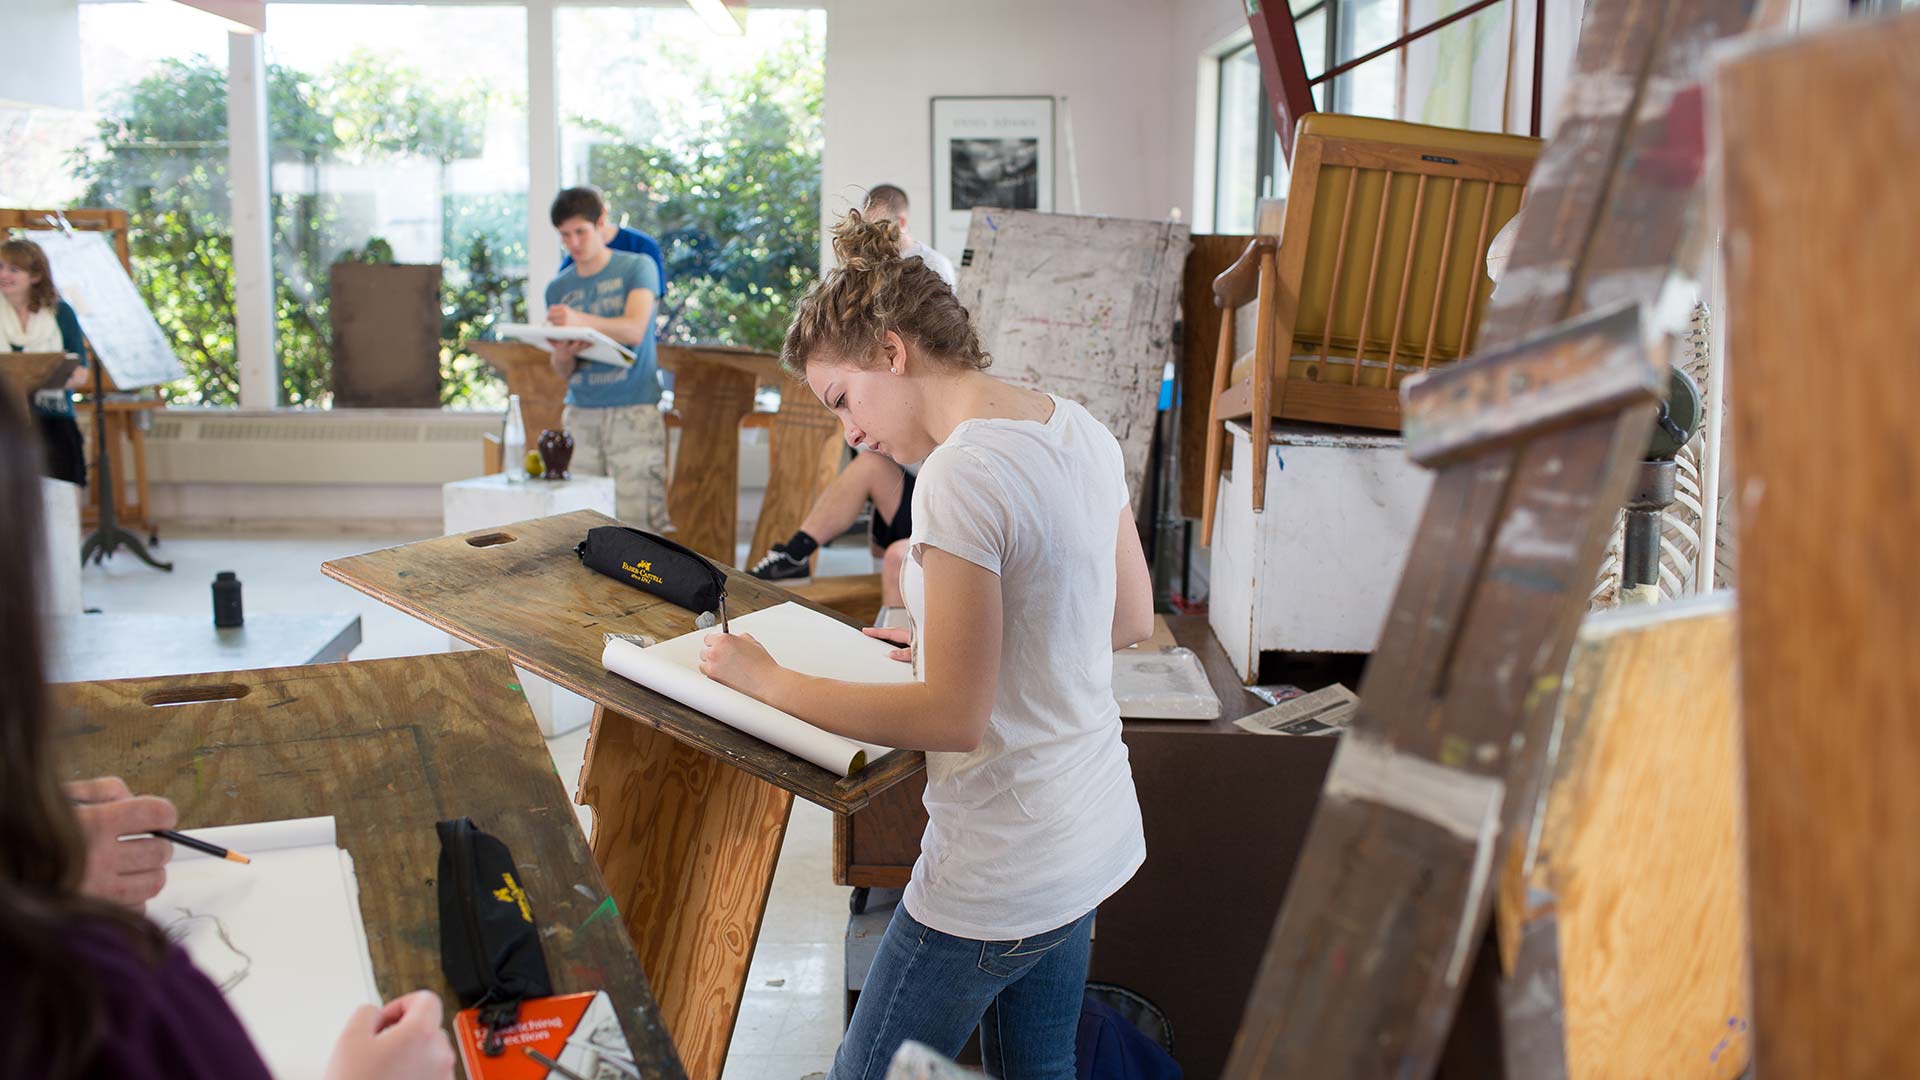 Students standing at work in the drawing studio